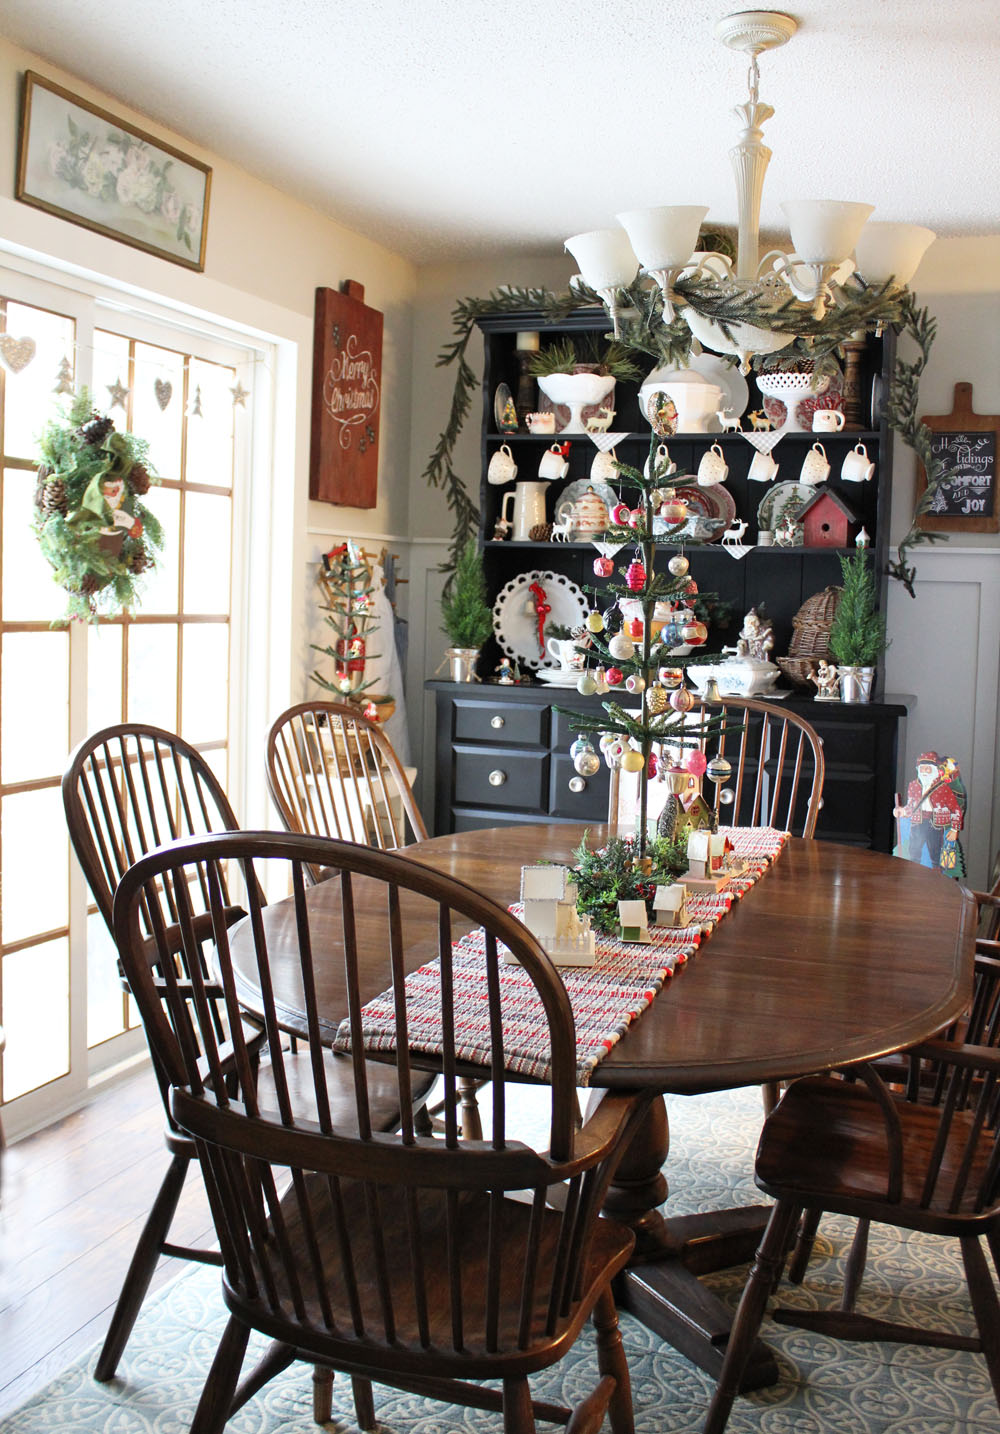 Some Christmas Decorating Ideas From Our Home... - Itsy Bits and Pieces